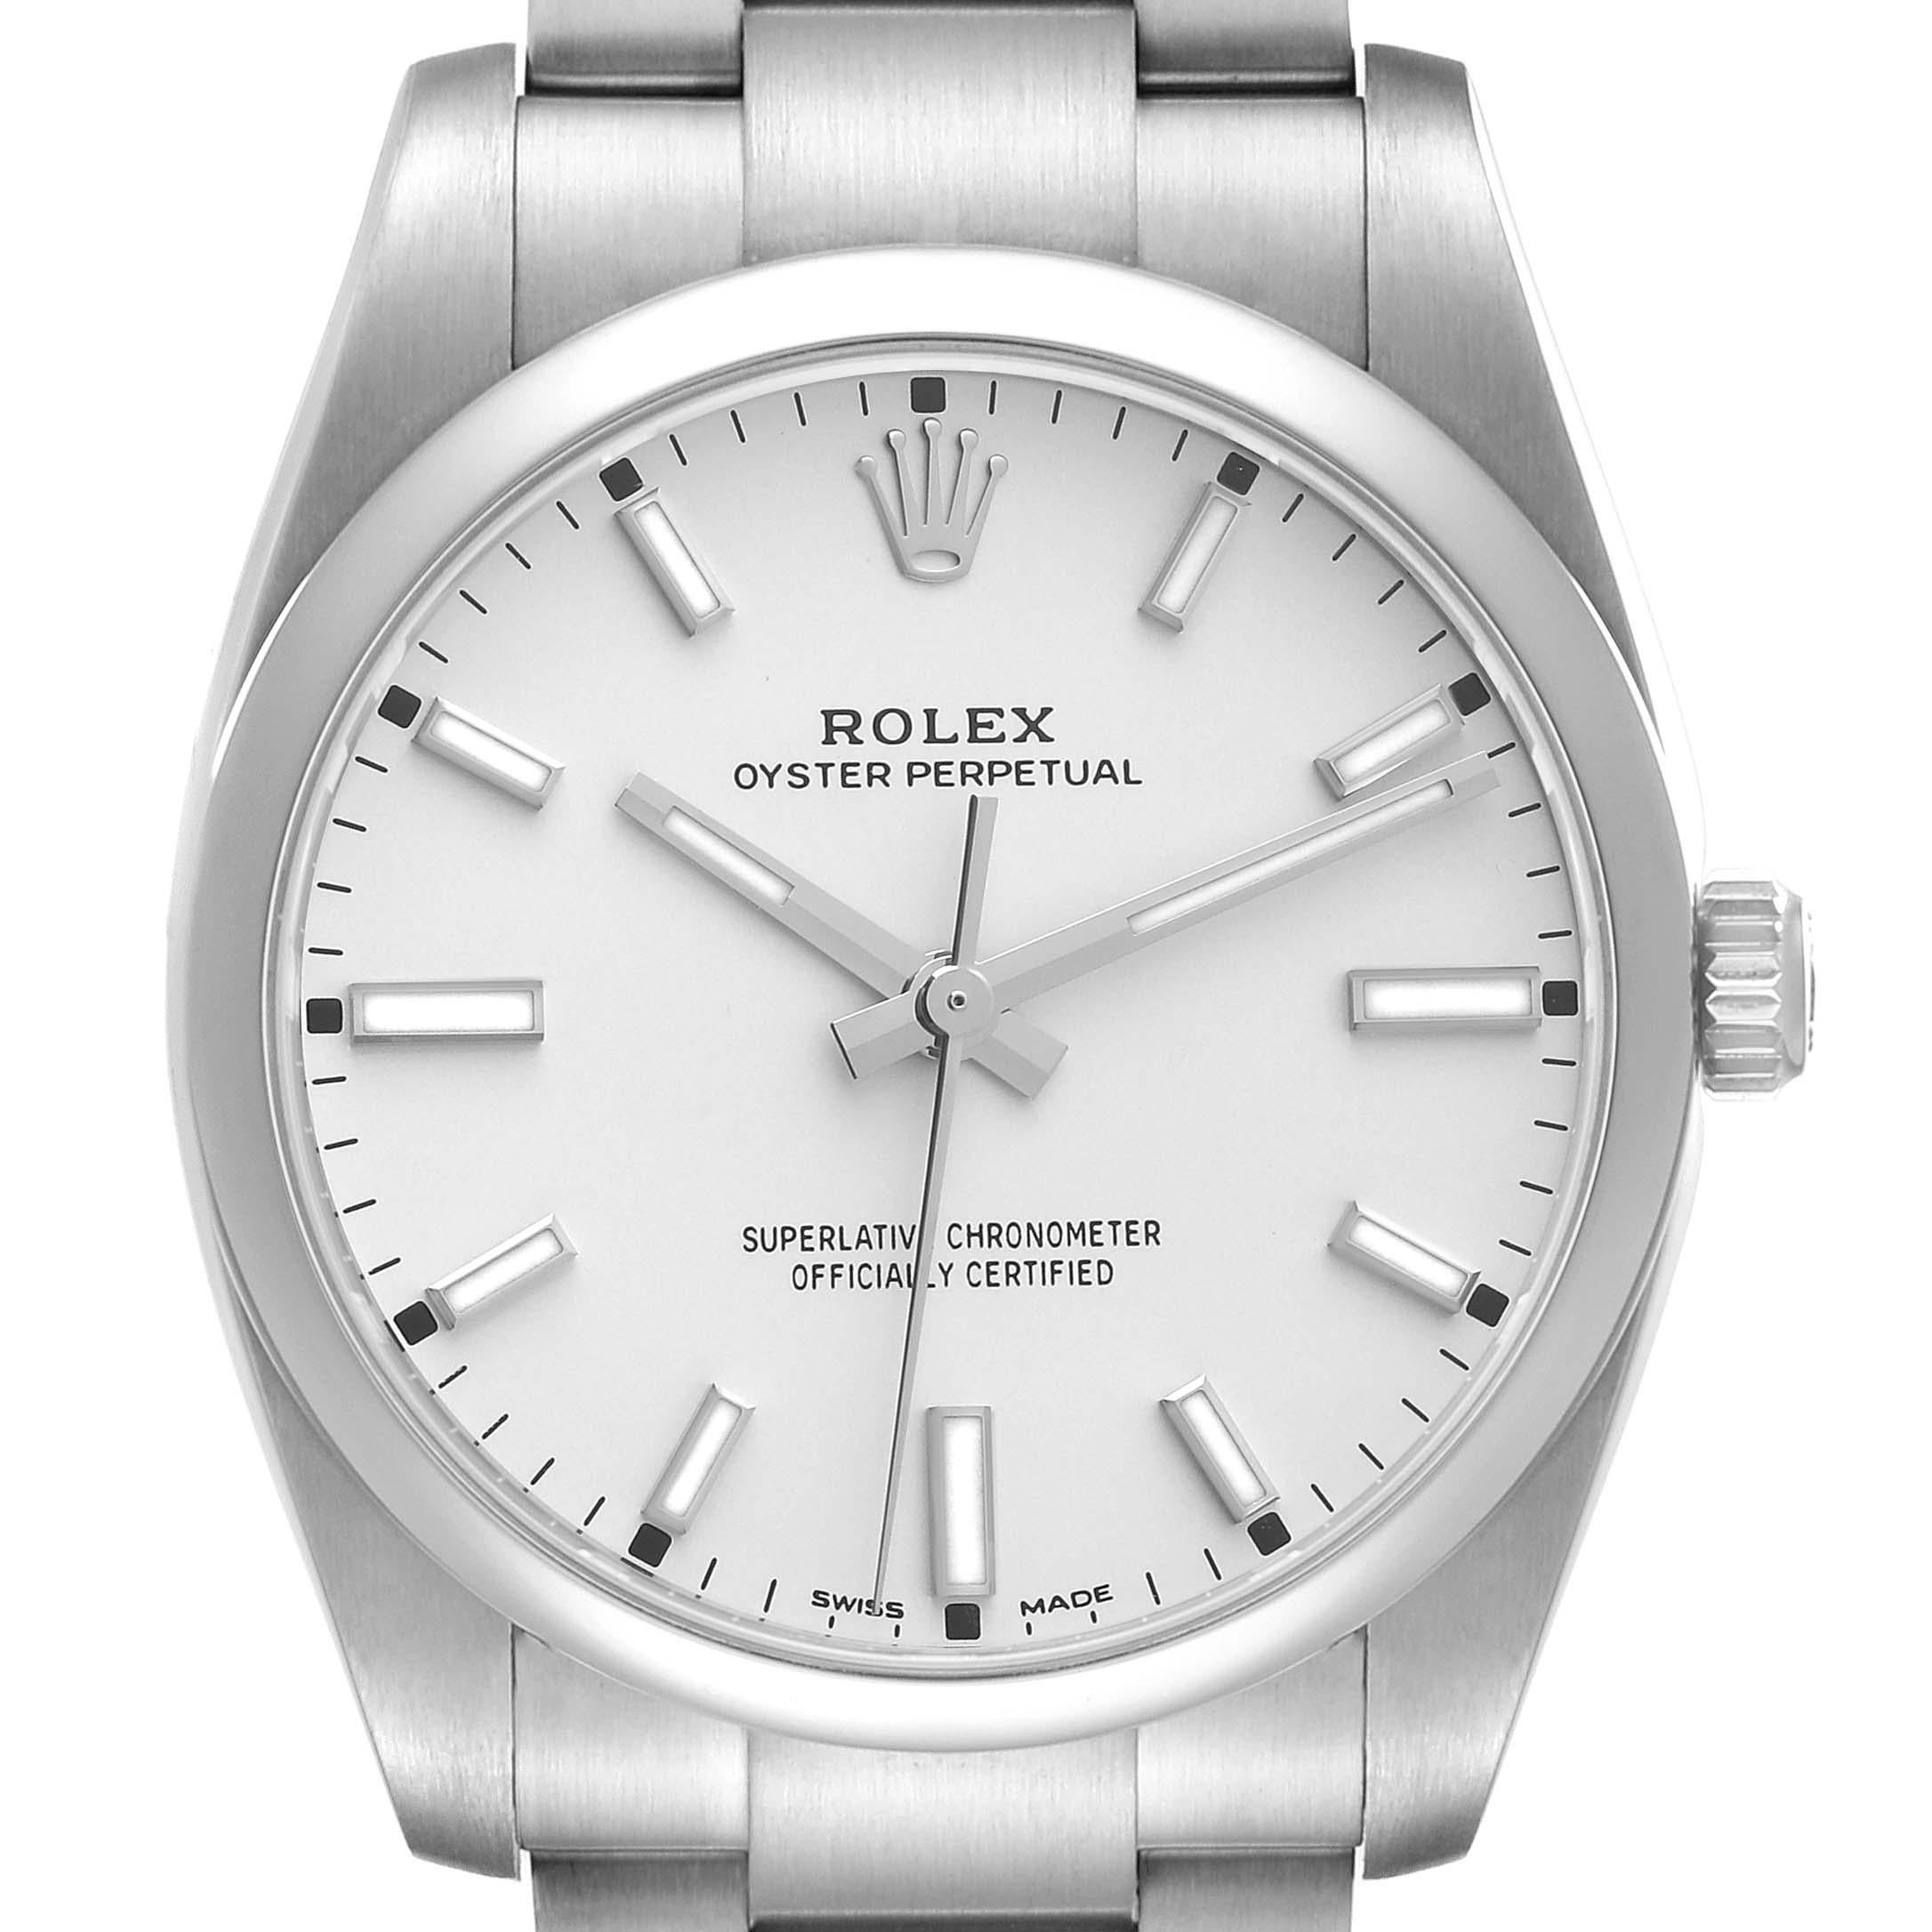 Rolex Oyster Perpetual Silver Dial Smooth Bezel Mens Watch 114200 Box Card For Sale